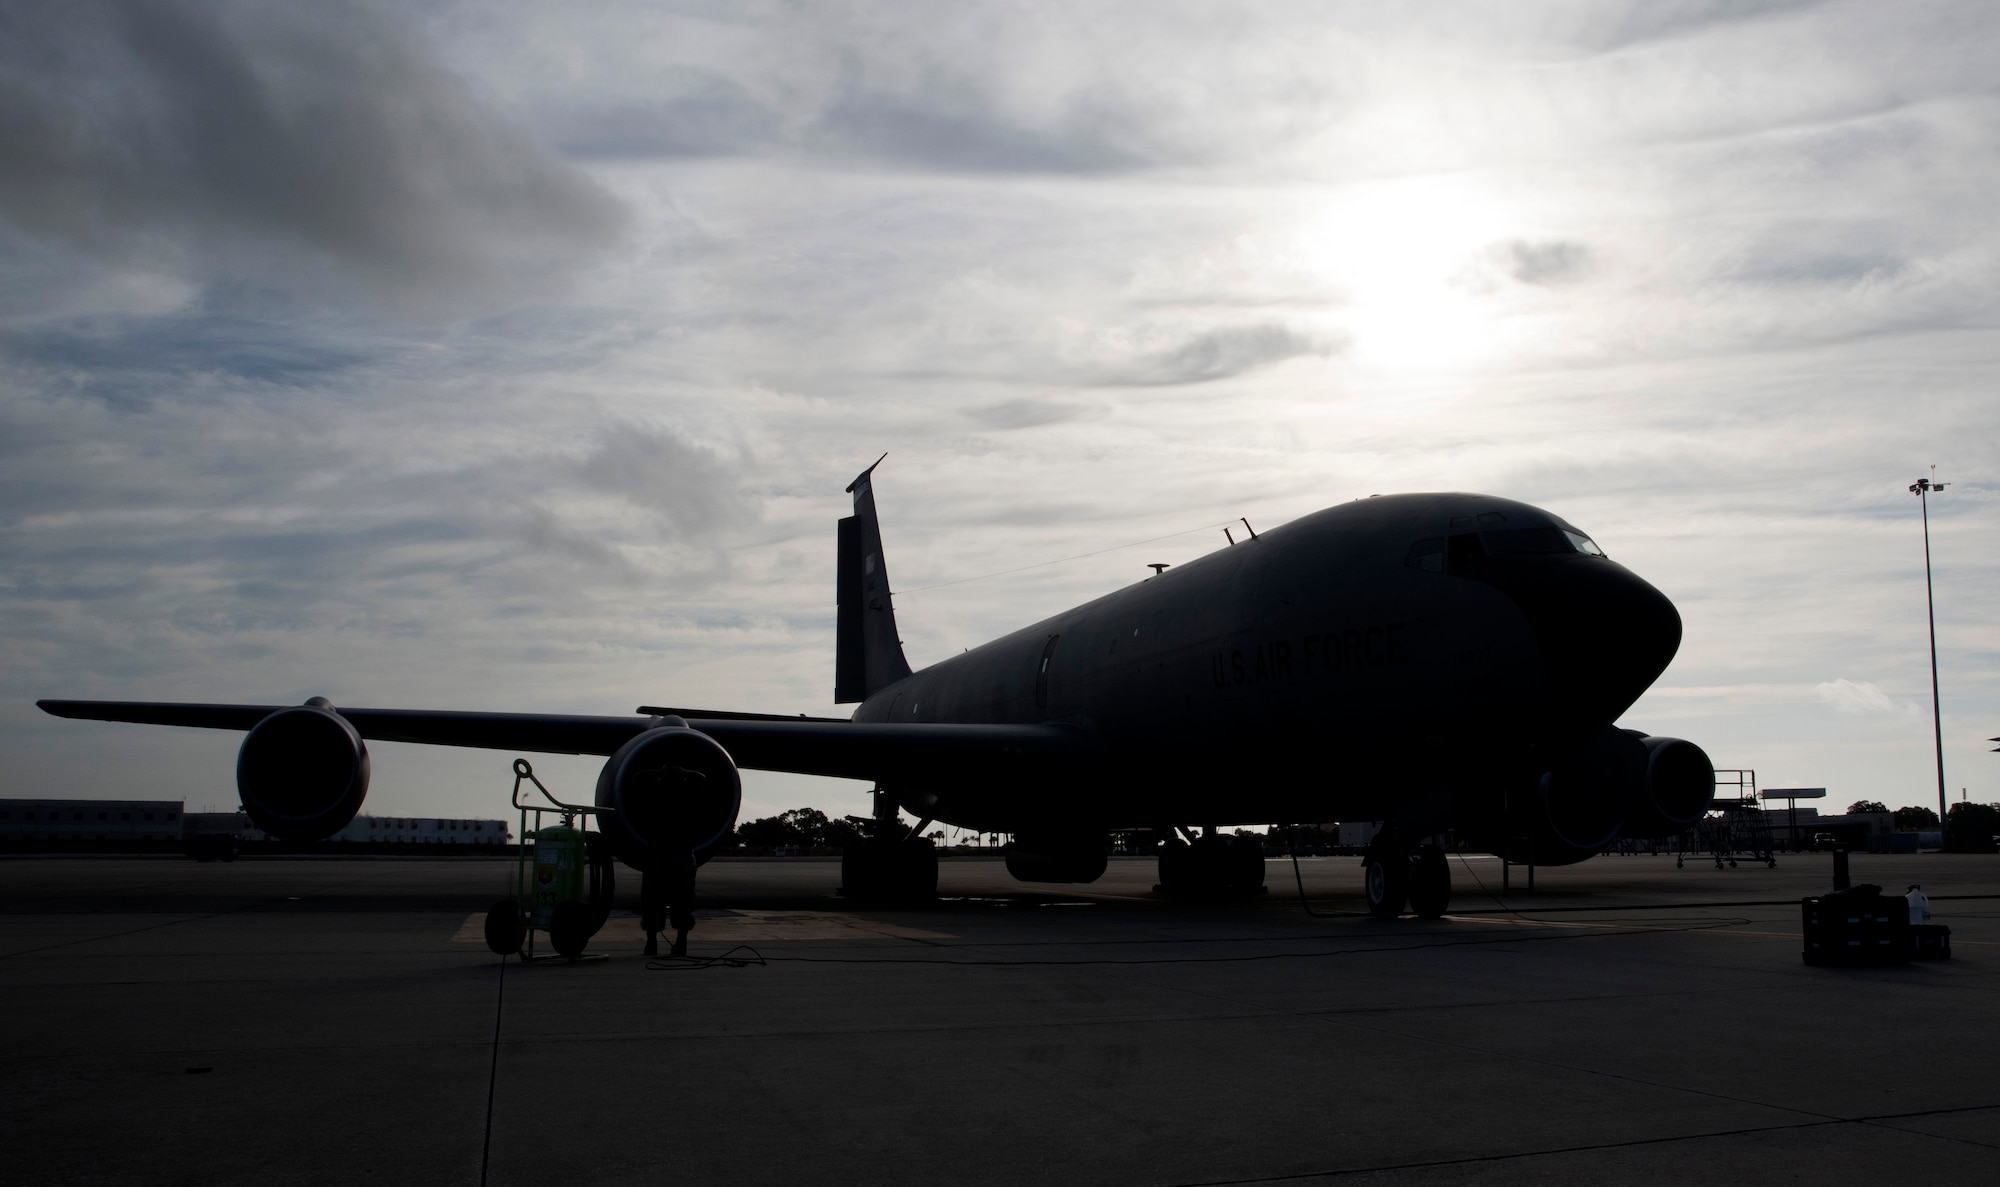 A KC-135 Stratotanker aircraft sits on the flightline at MacDill Air Force Base, Fla., July 14, 2017. Students in the KC-135R/T Flightline F108 Engine Operator course spend their final day applying what they have learned over the four-day course. (U.S. Air Force photo by Airman 1st Class Ashley Perdue)